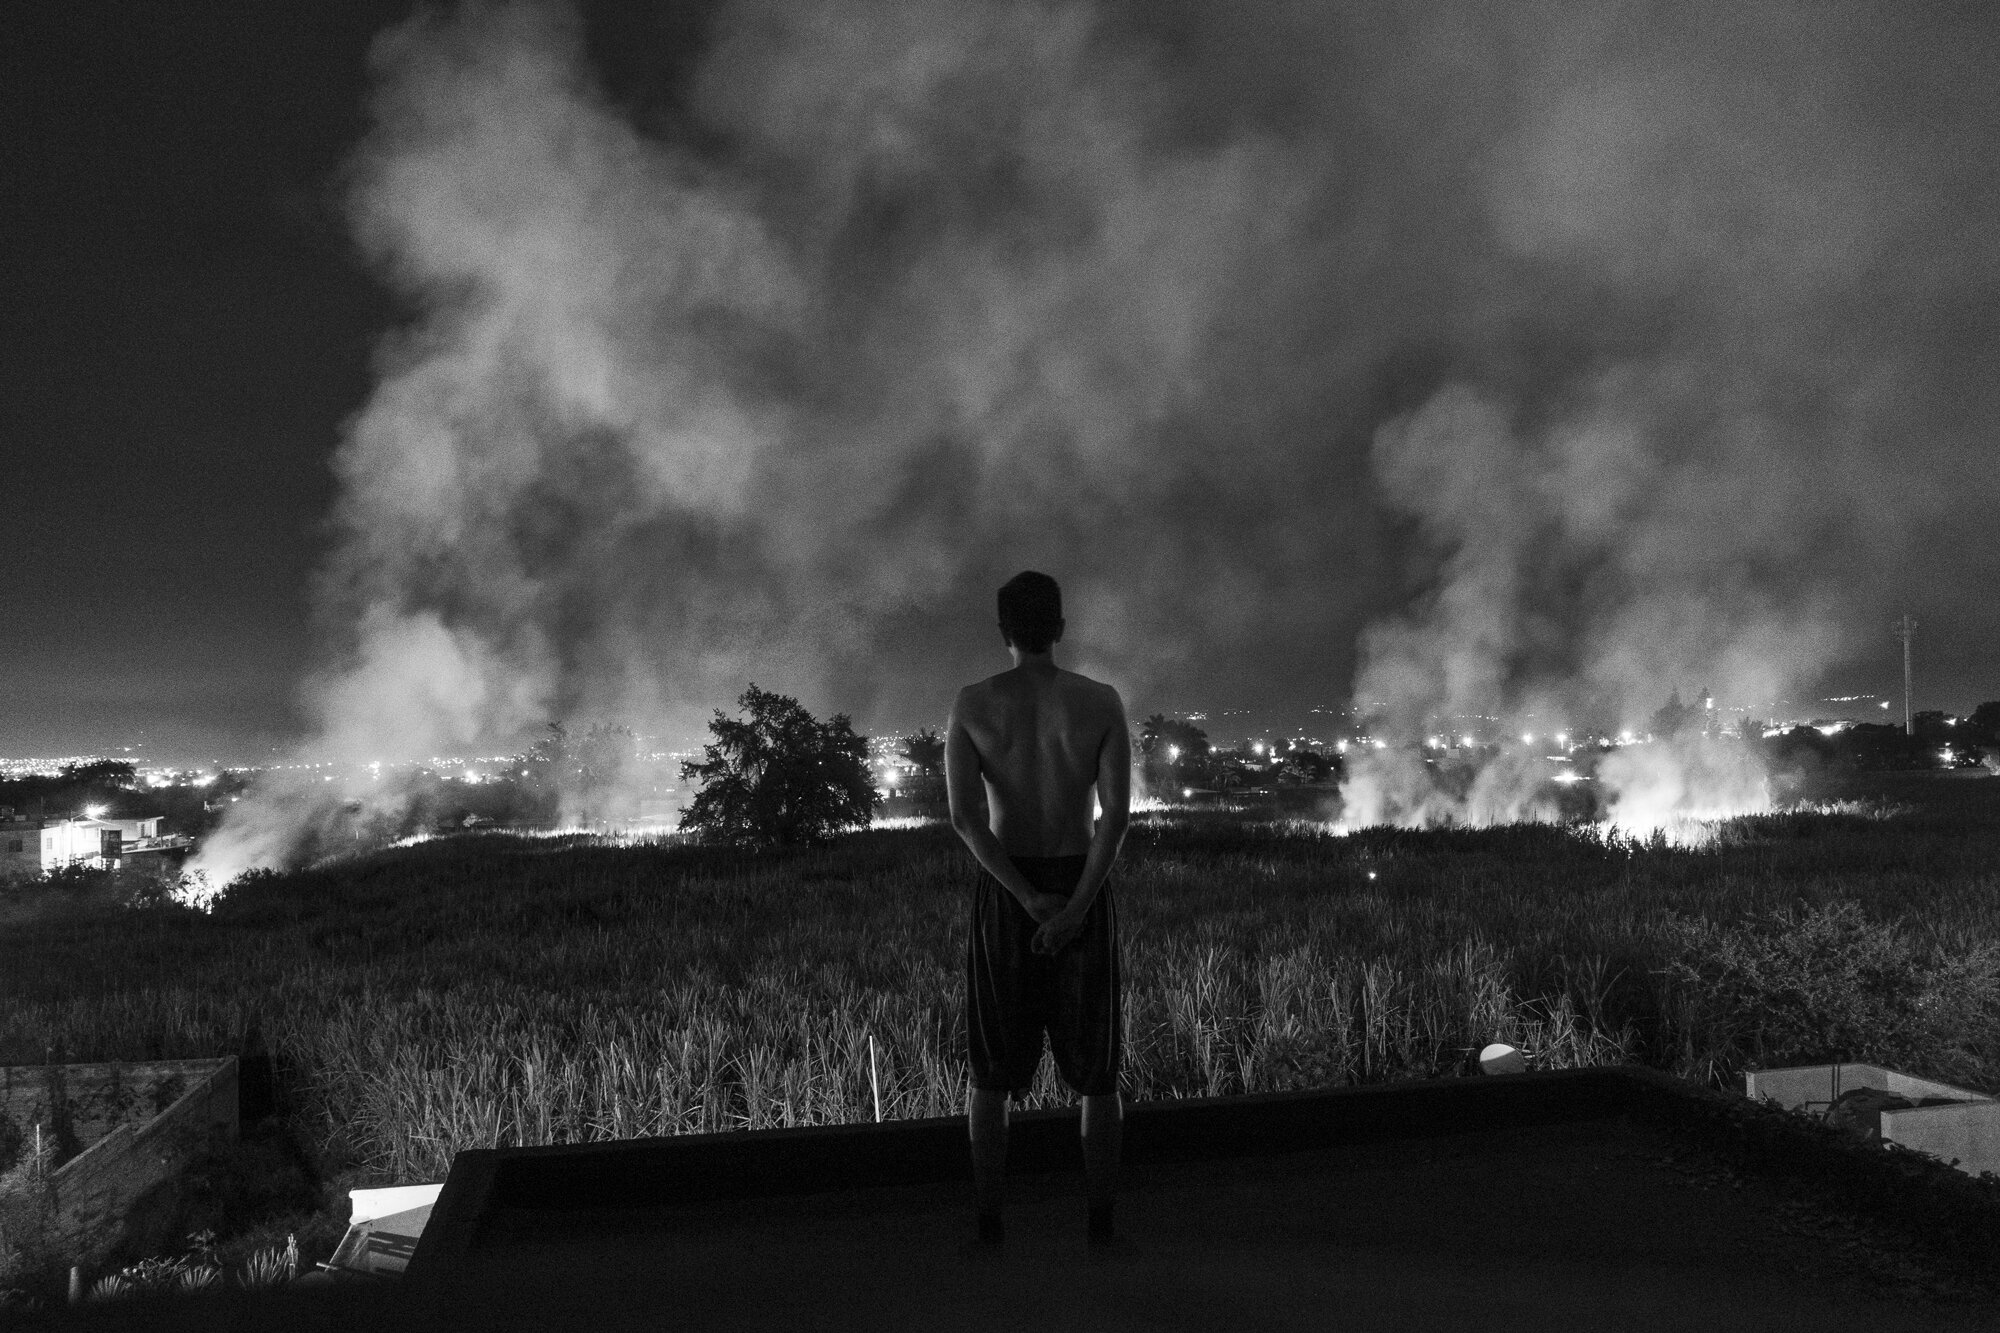  A self-portrait watching sugar cane burn. I live in Nayarit and the Mexican state has many sugar cane fields, and I have documented many of the laborers who work there. While watching the sugar canes burn I could only think how some of us have the “